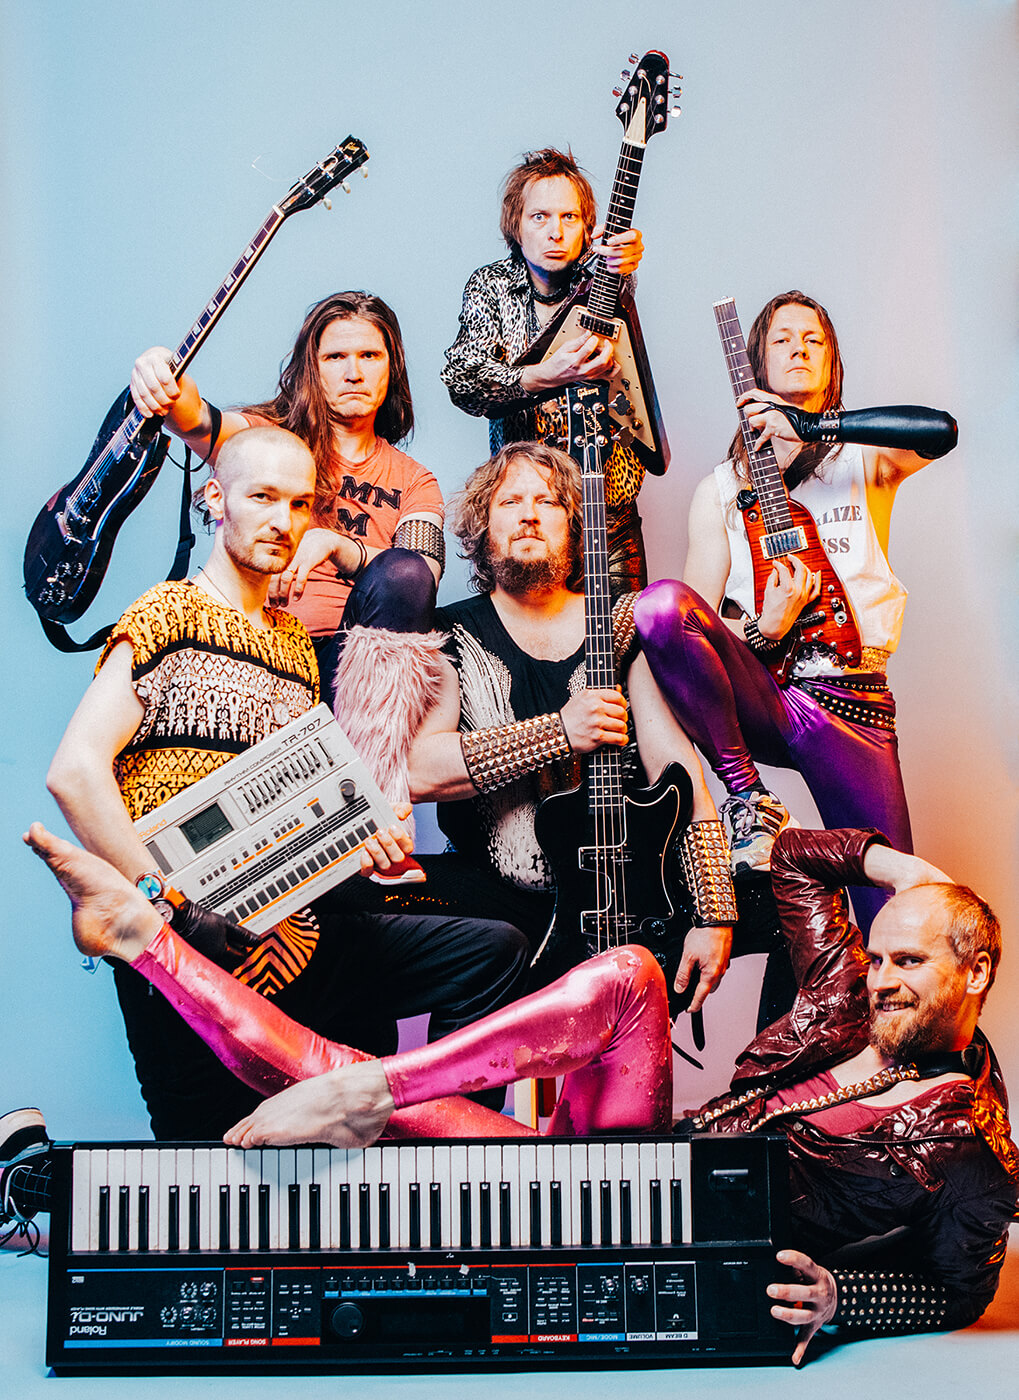 A colorfull image of a band posing in the studio with instruments